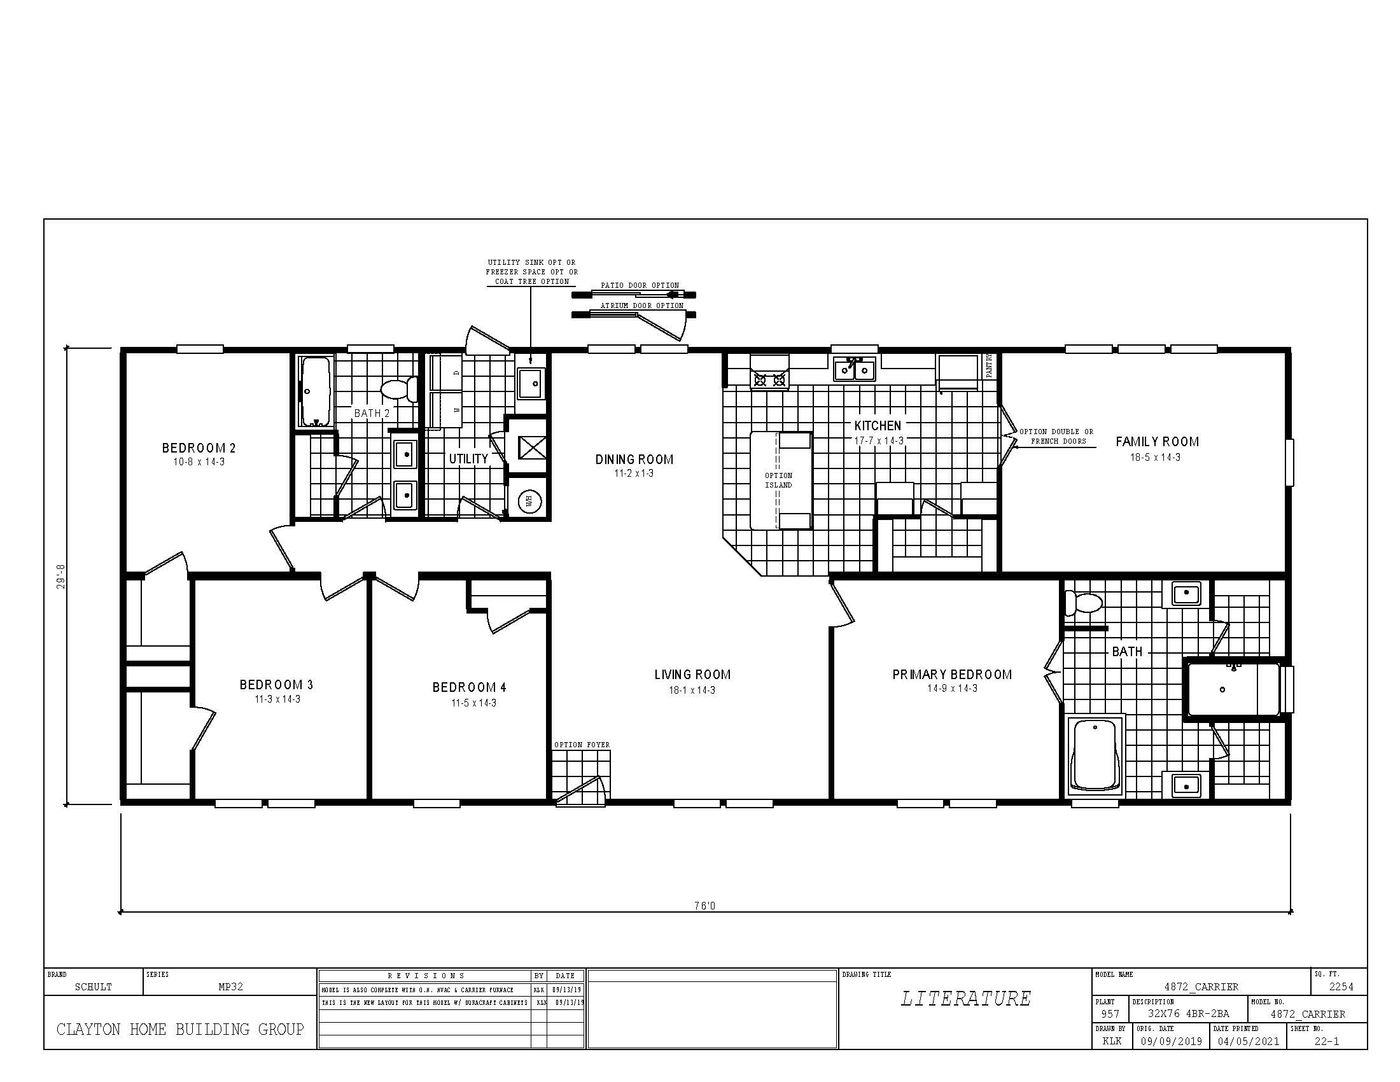 The 4872 ENTERPRISE 7632 Floor Plan. This Manufactured Mobile Home features 4 bedrooms and 2 baths.